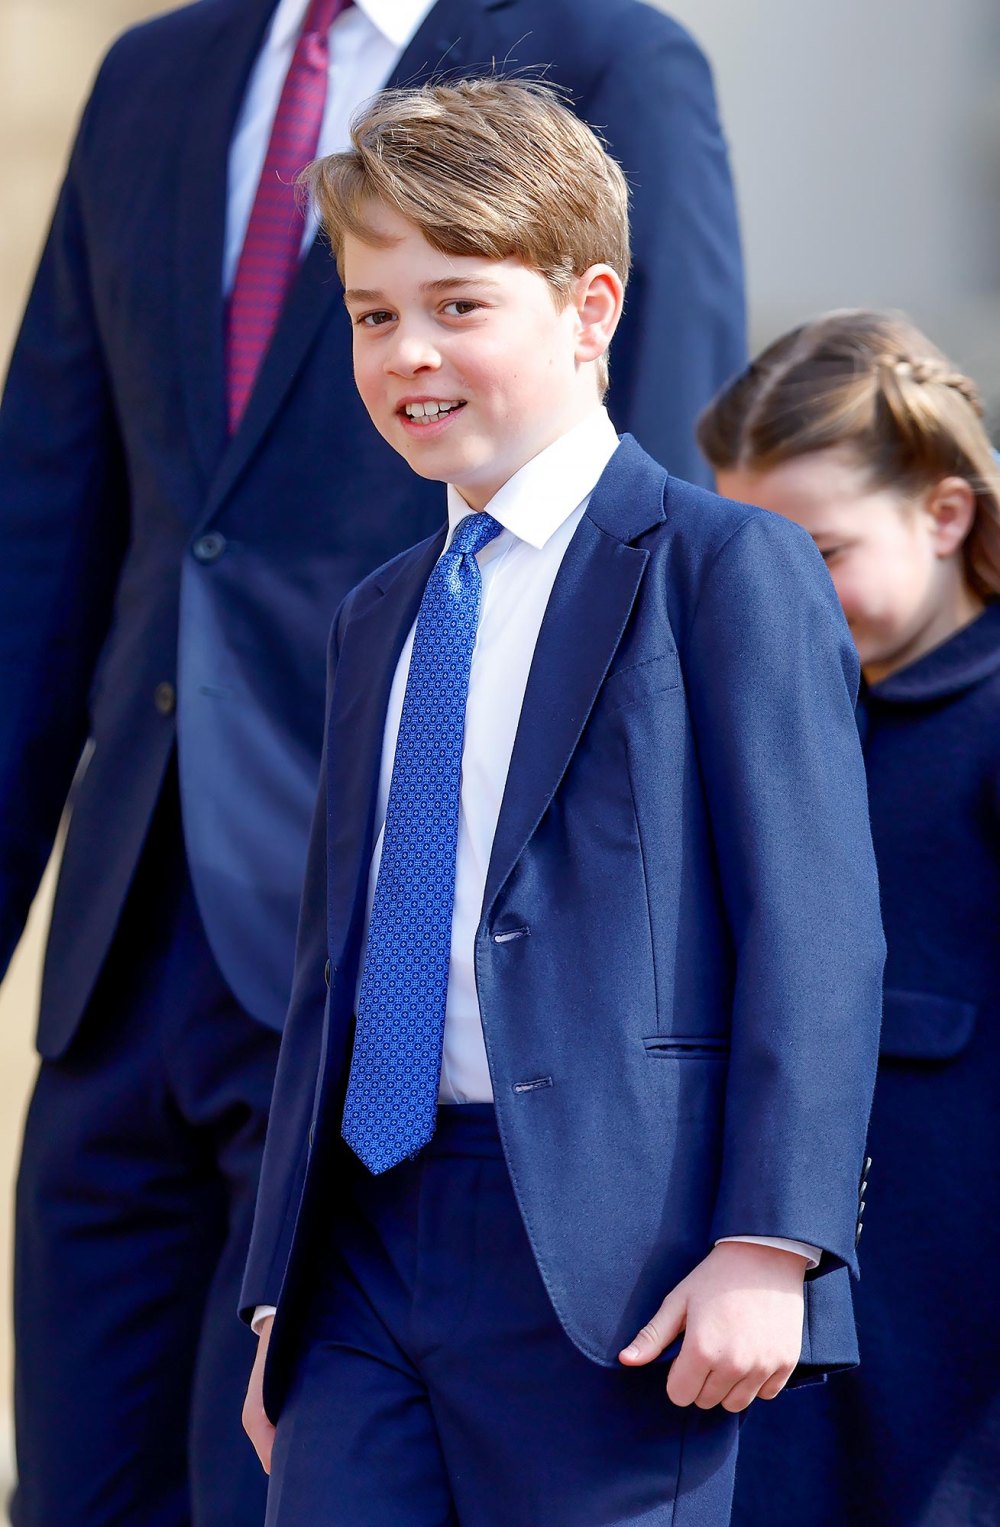 Prince George Will Not Start Royal Duties Until His 20s, Book Says